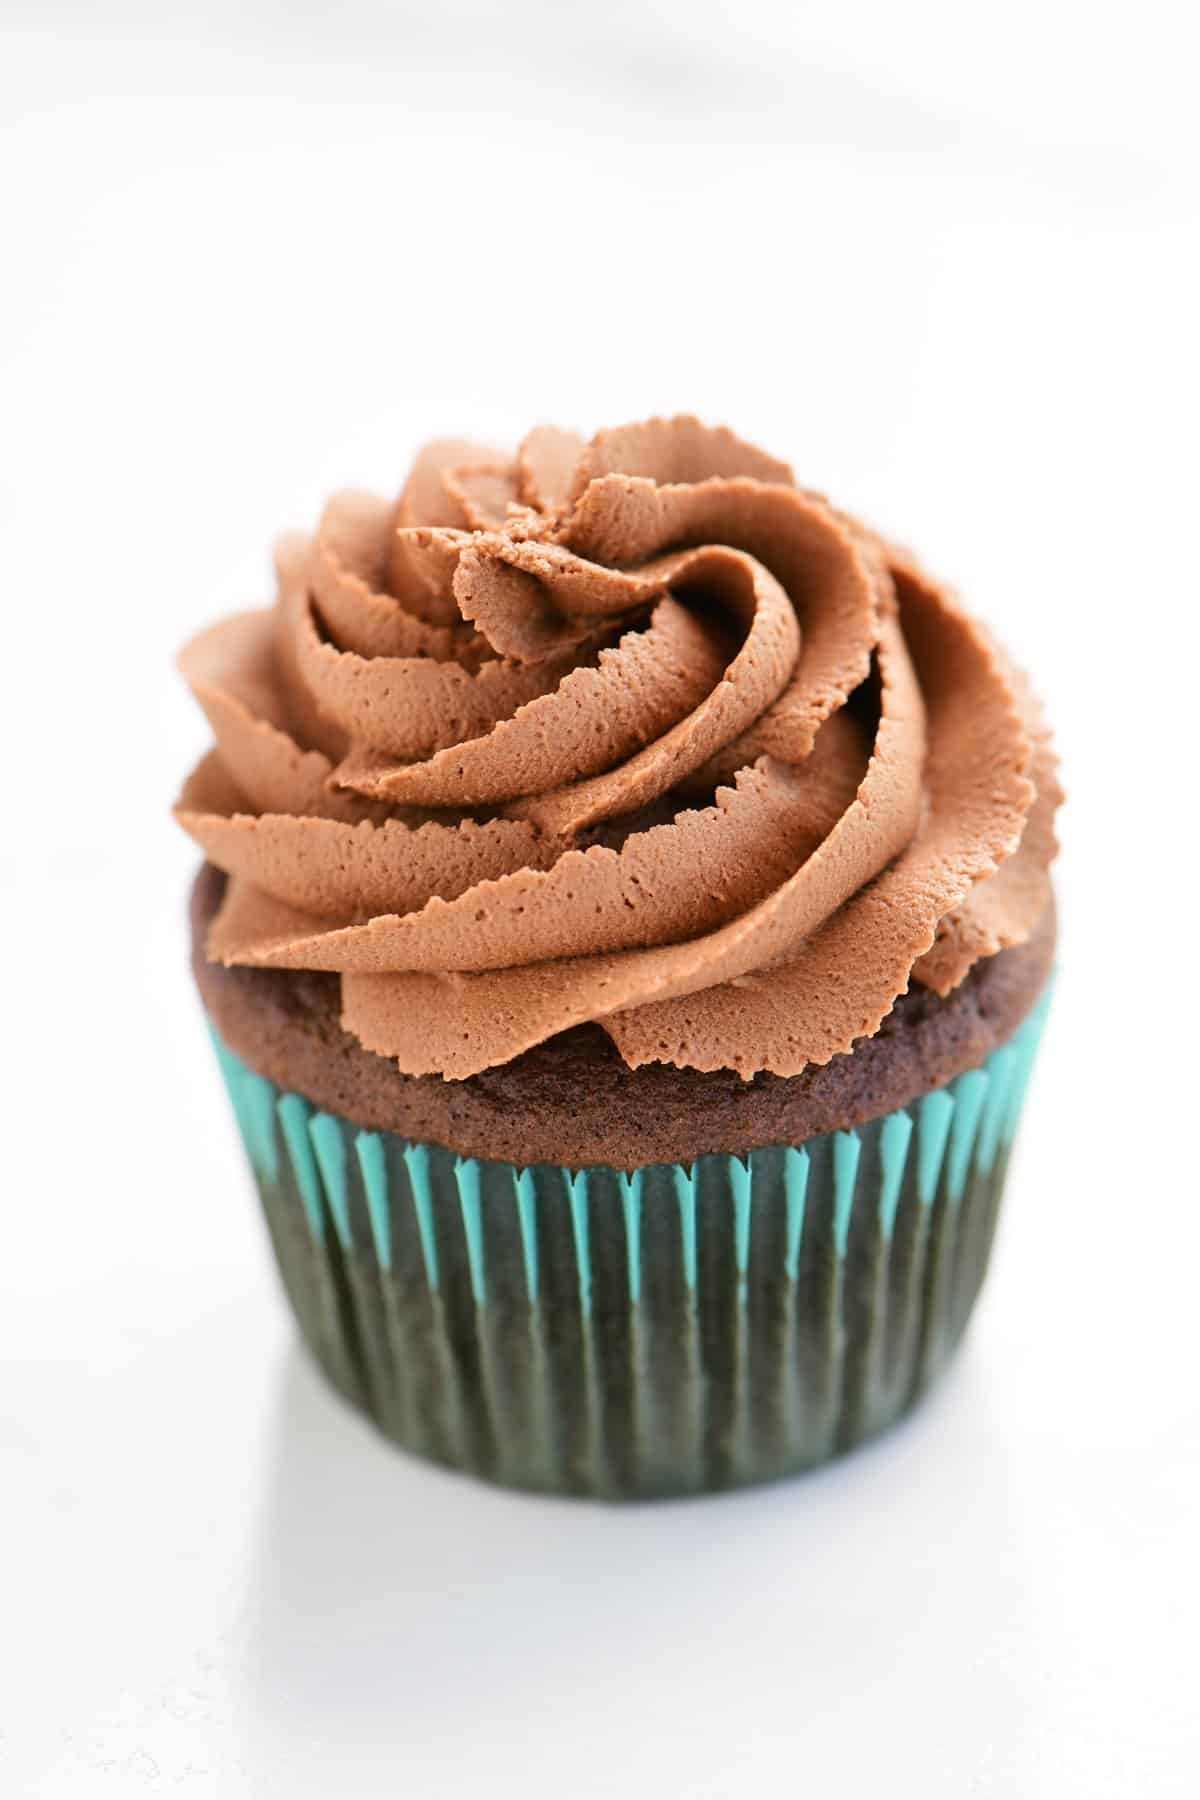 a cupcake frosted with chocolate buttercream